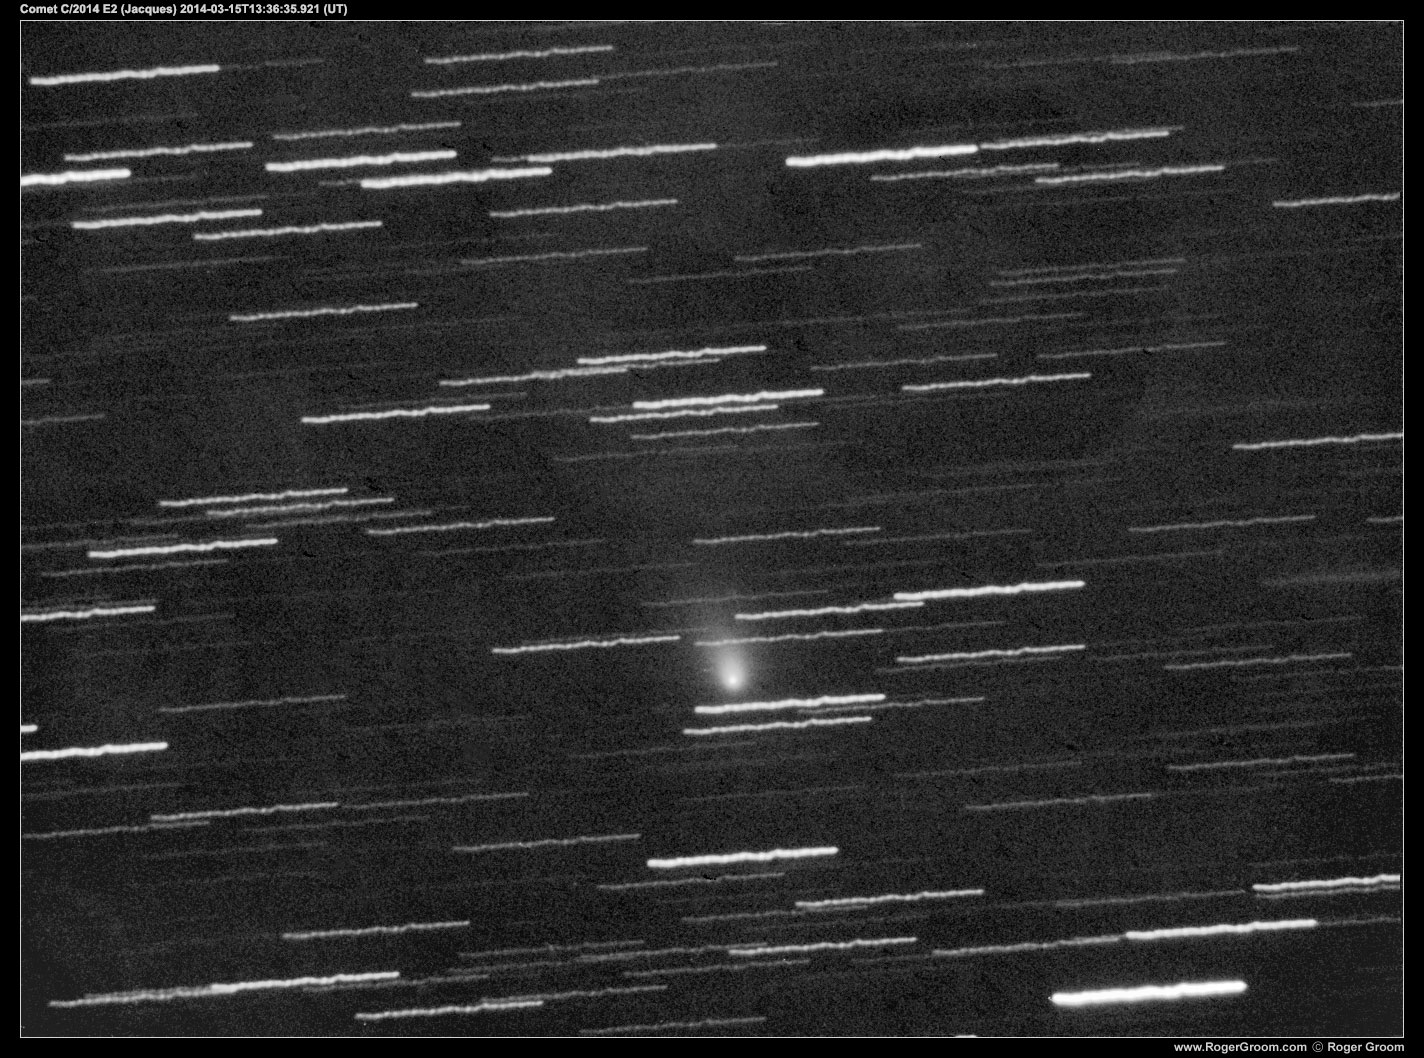 Comet C/2014 E2 (Jacques) 10x300s exposures. Average. Heavy processing to reduce the effects of a nearby almost full moon.